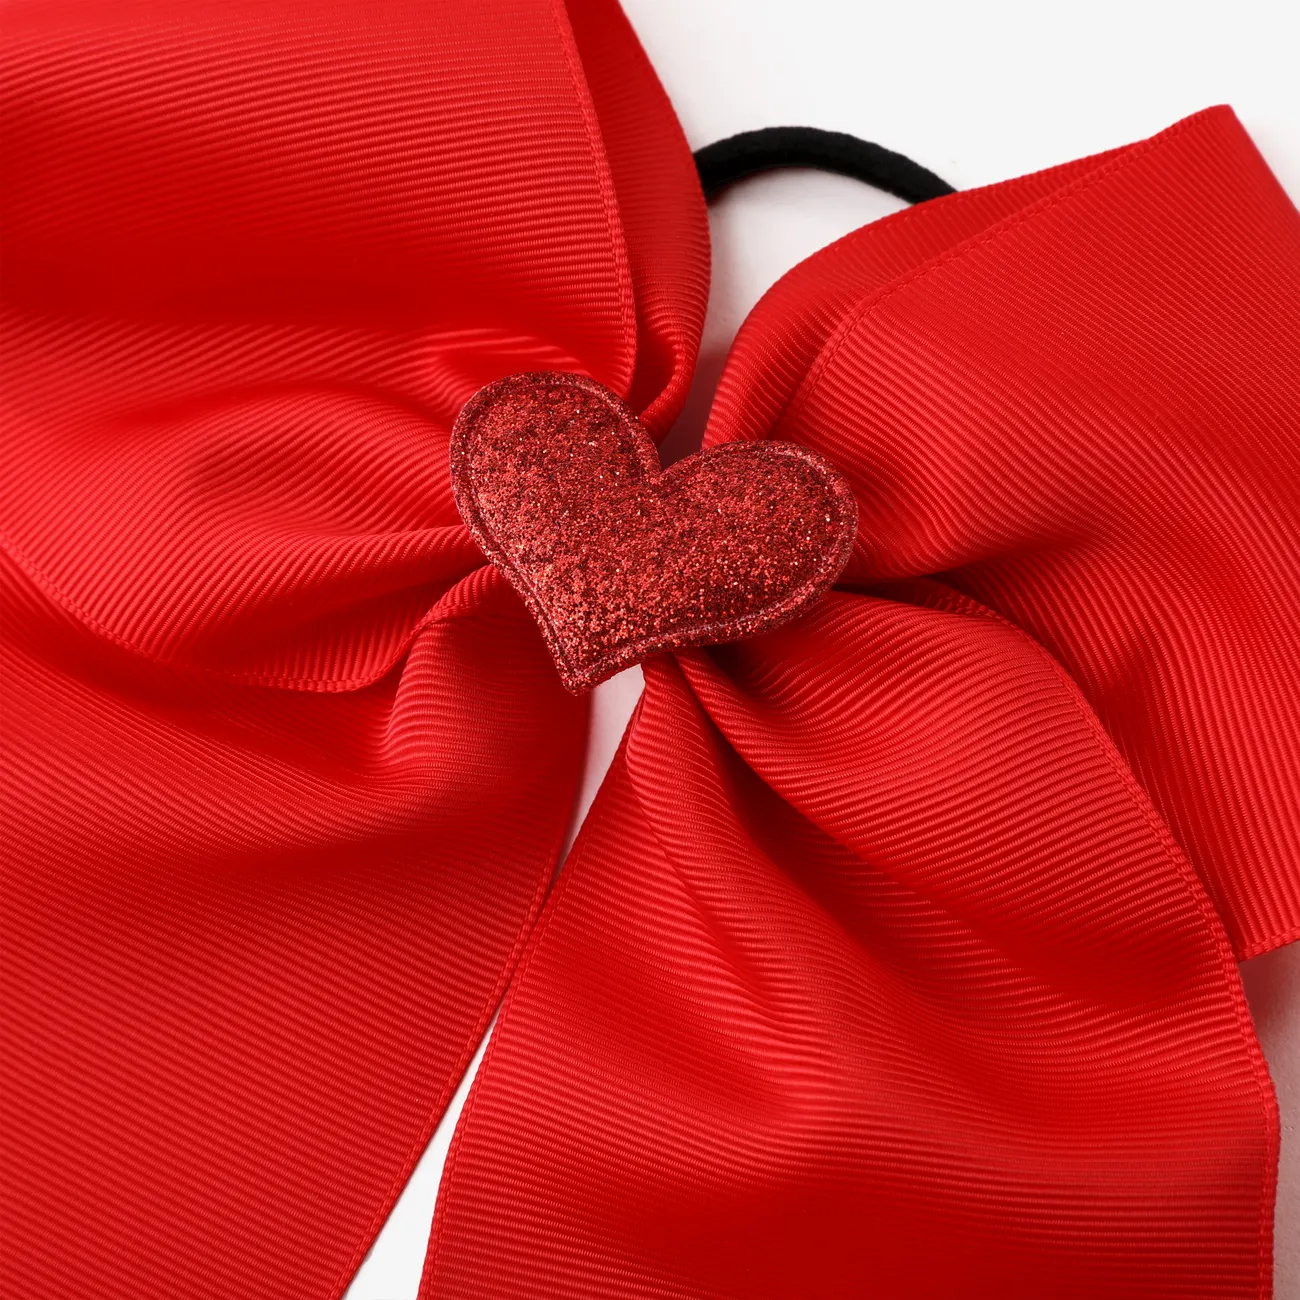 Toddler/adult Valentine's Day swallowtail bow large and small two-piece set Red big image 1